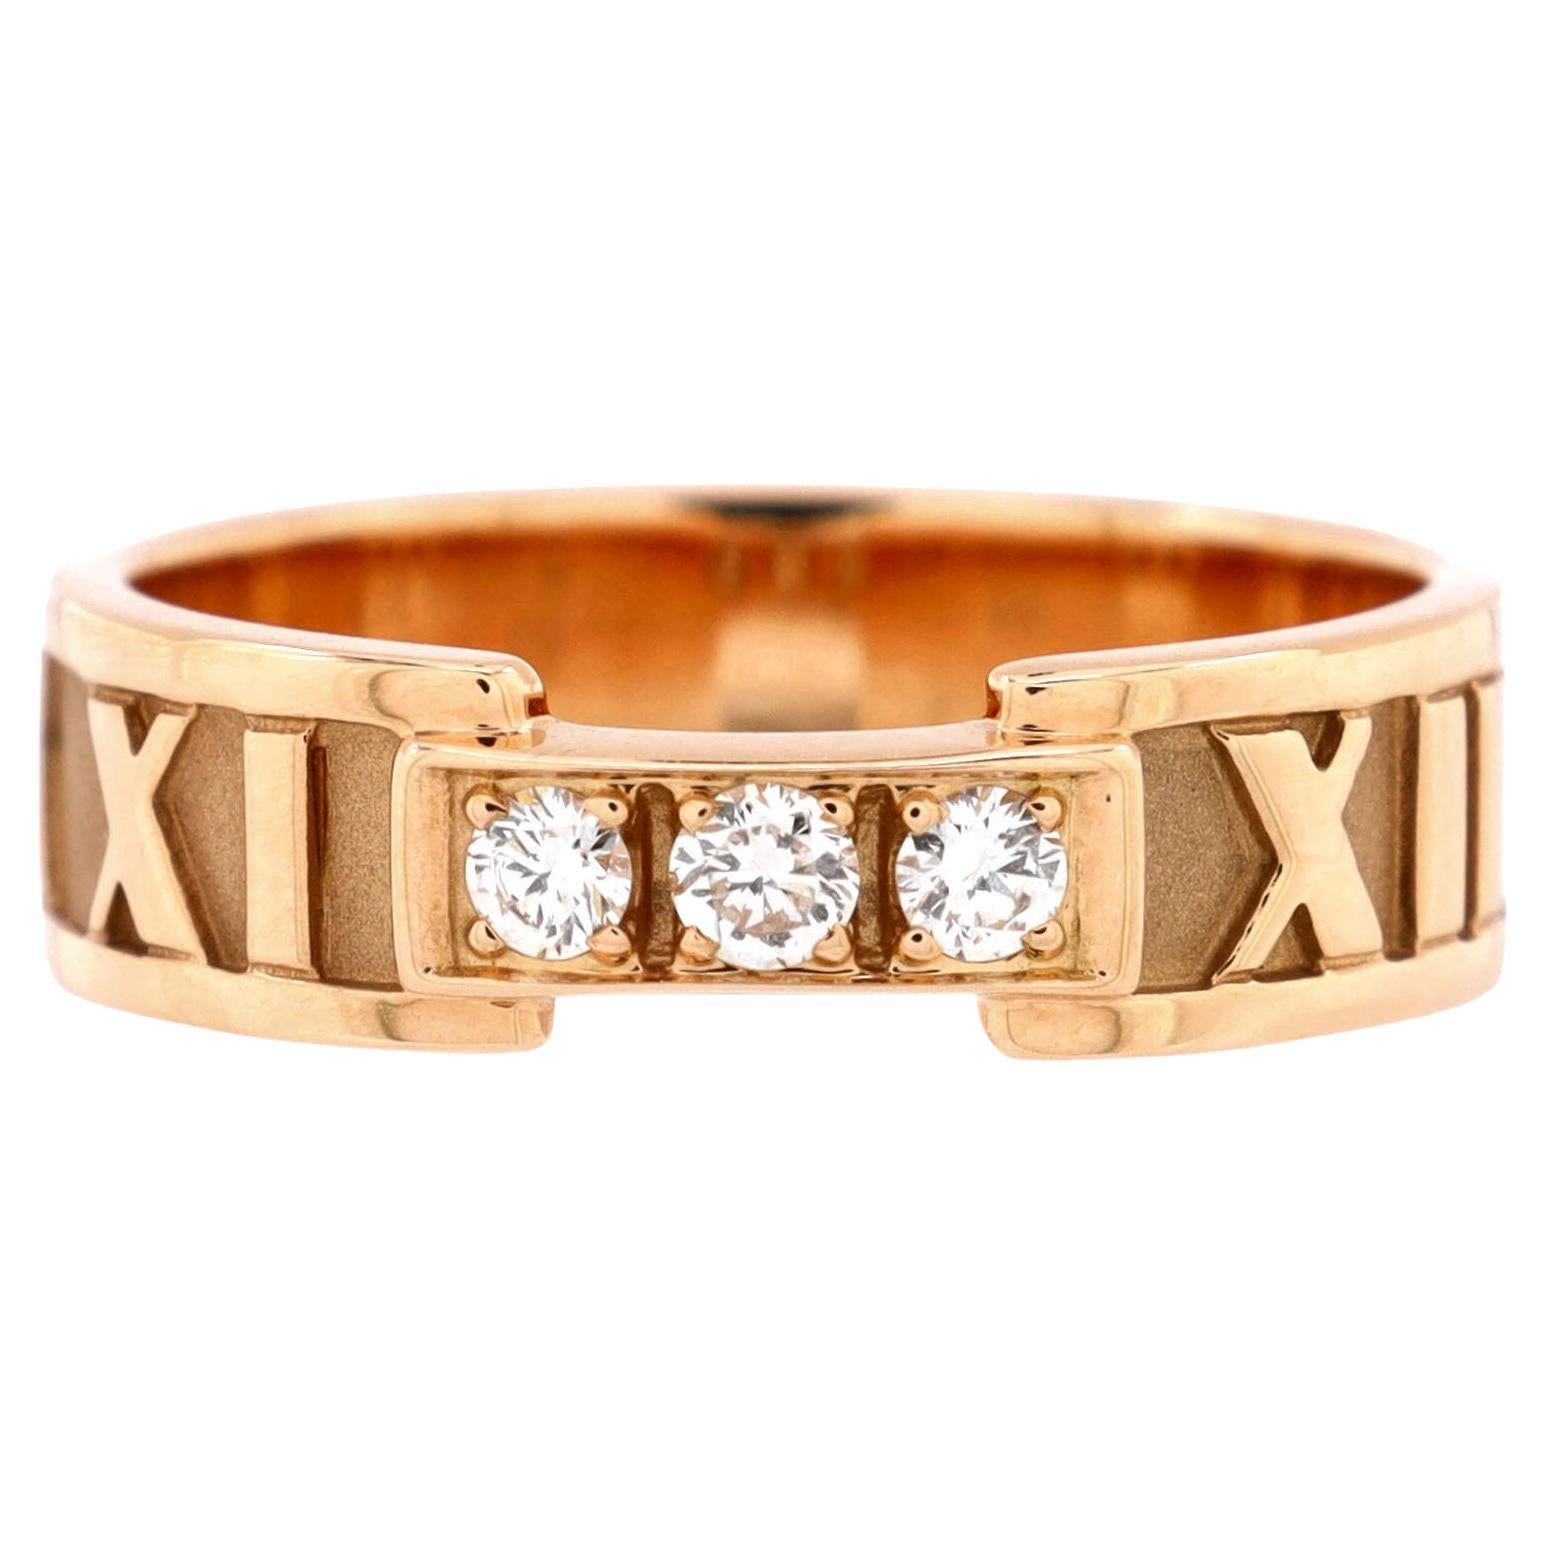 Tiffany & Co. Atlas Band Ring 18K Rose Gold with Diamonds